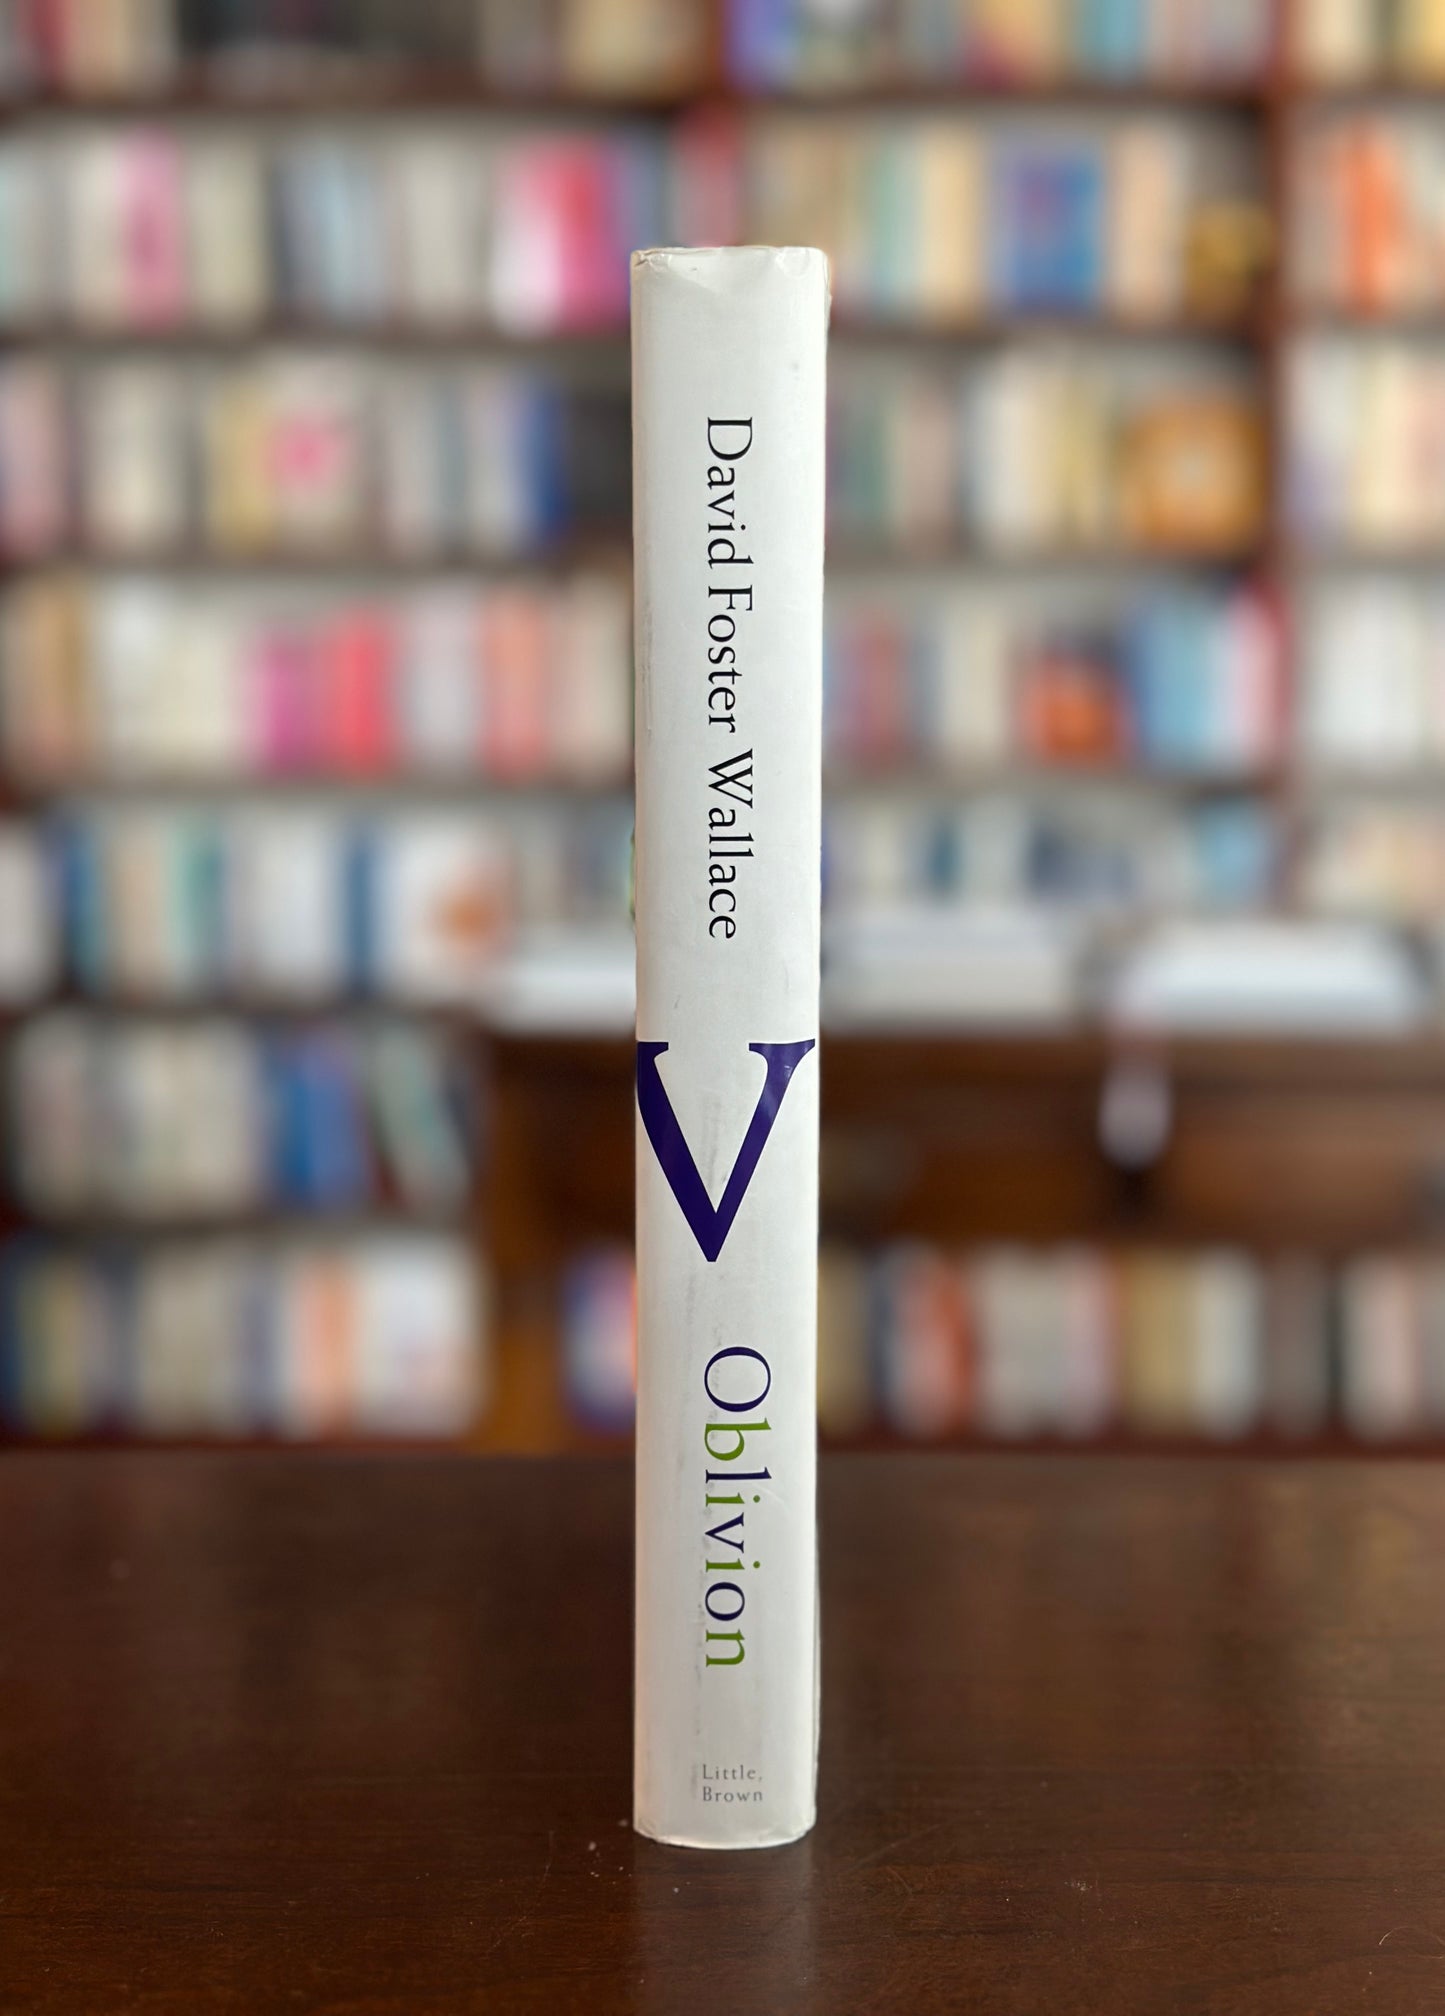 Oblivion by David Foster Wallace (First Edition)